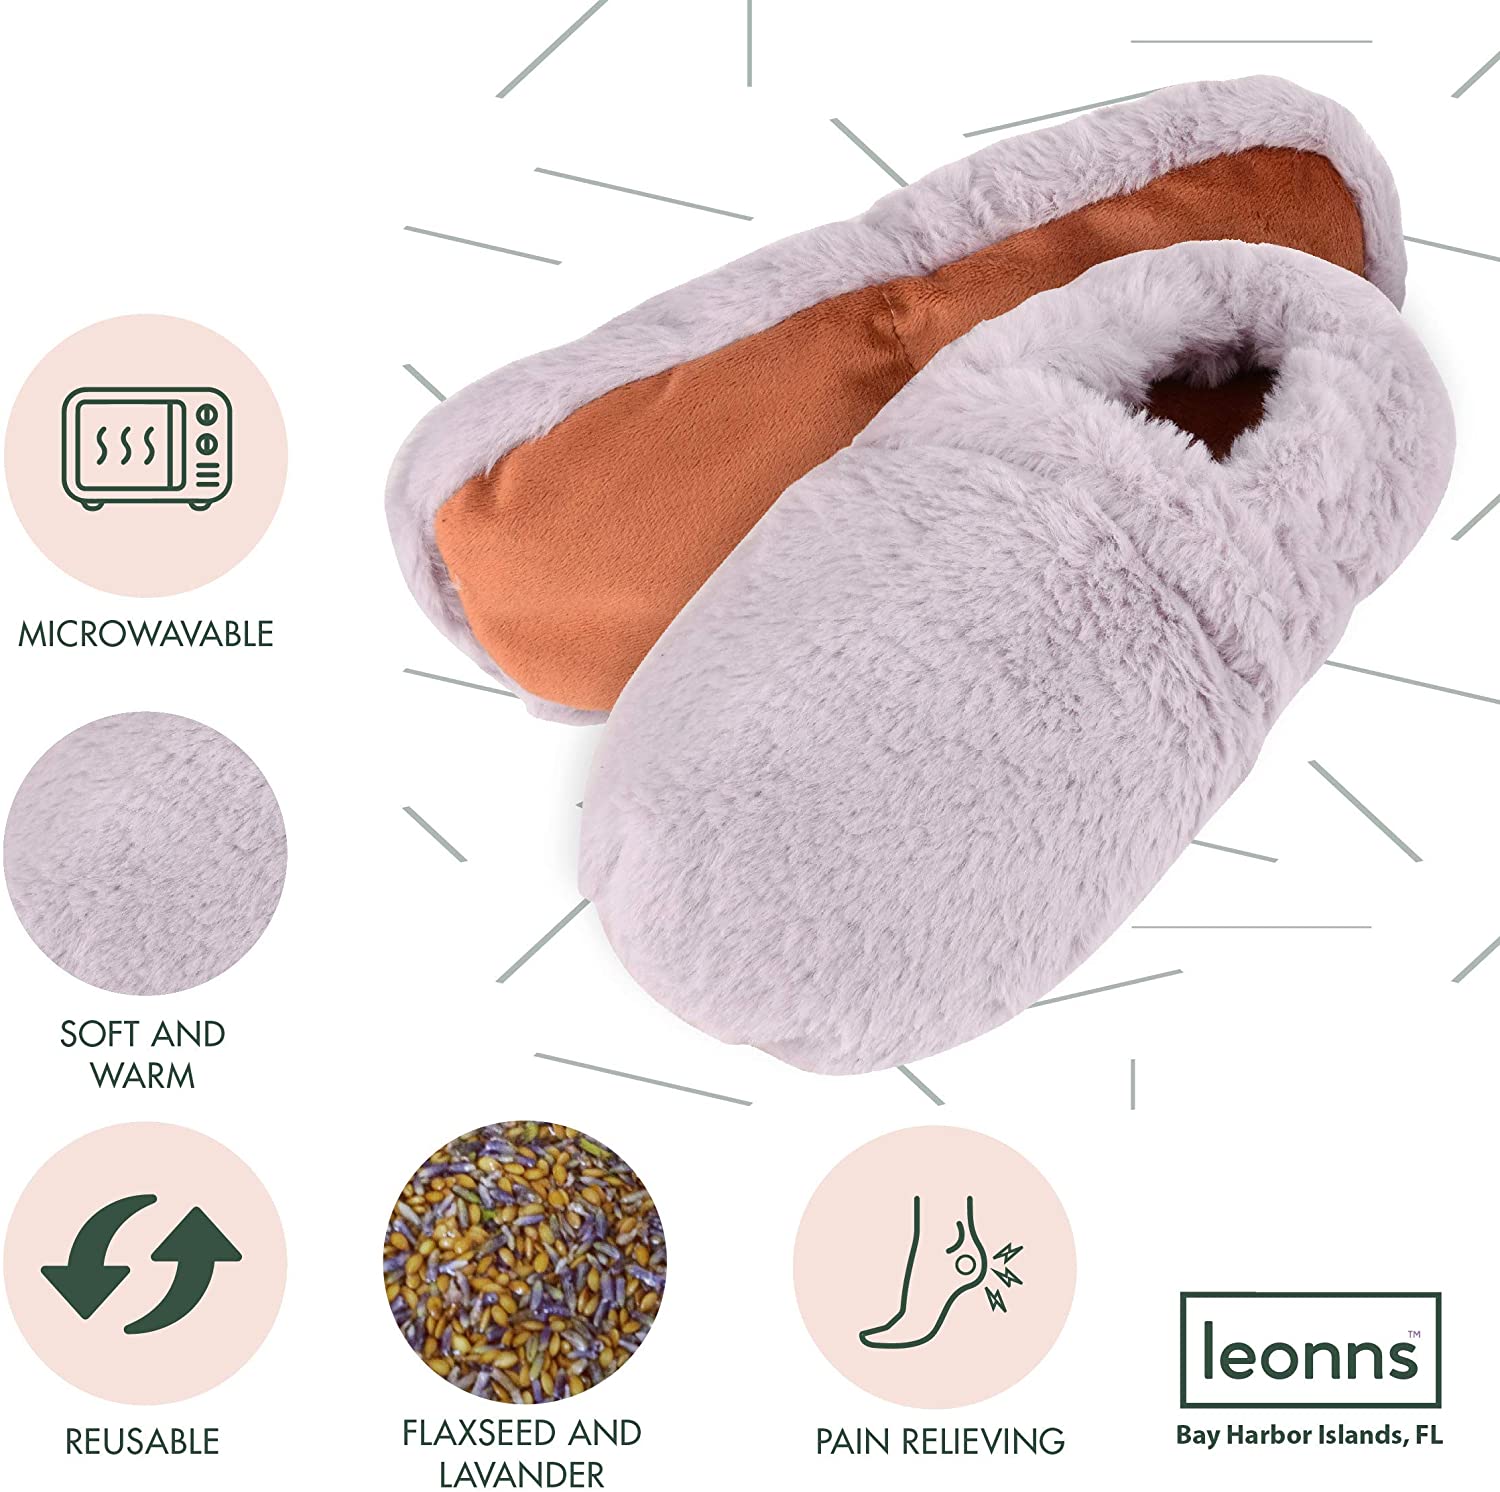 Heated Therapy Slippers (Light Grey)